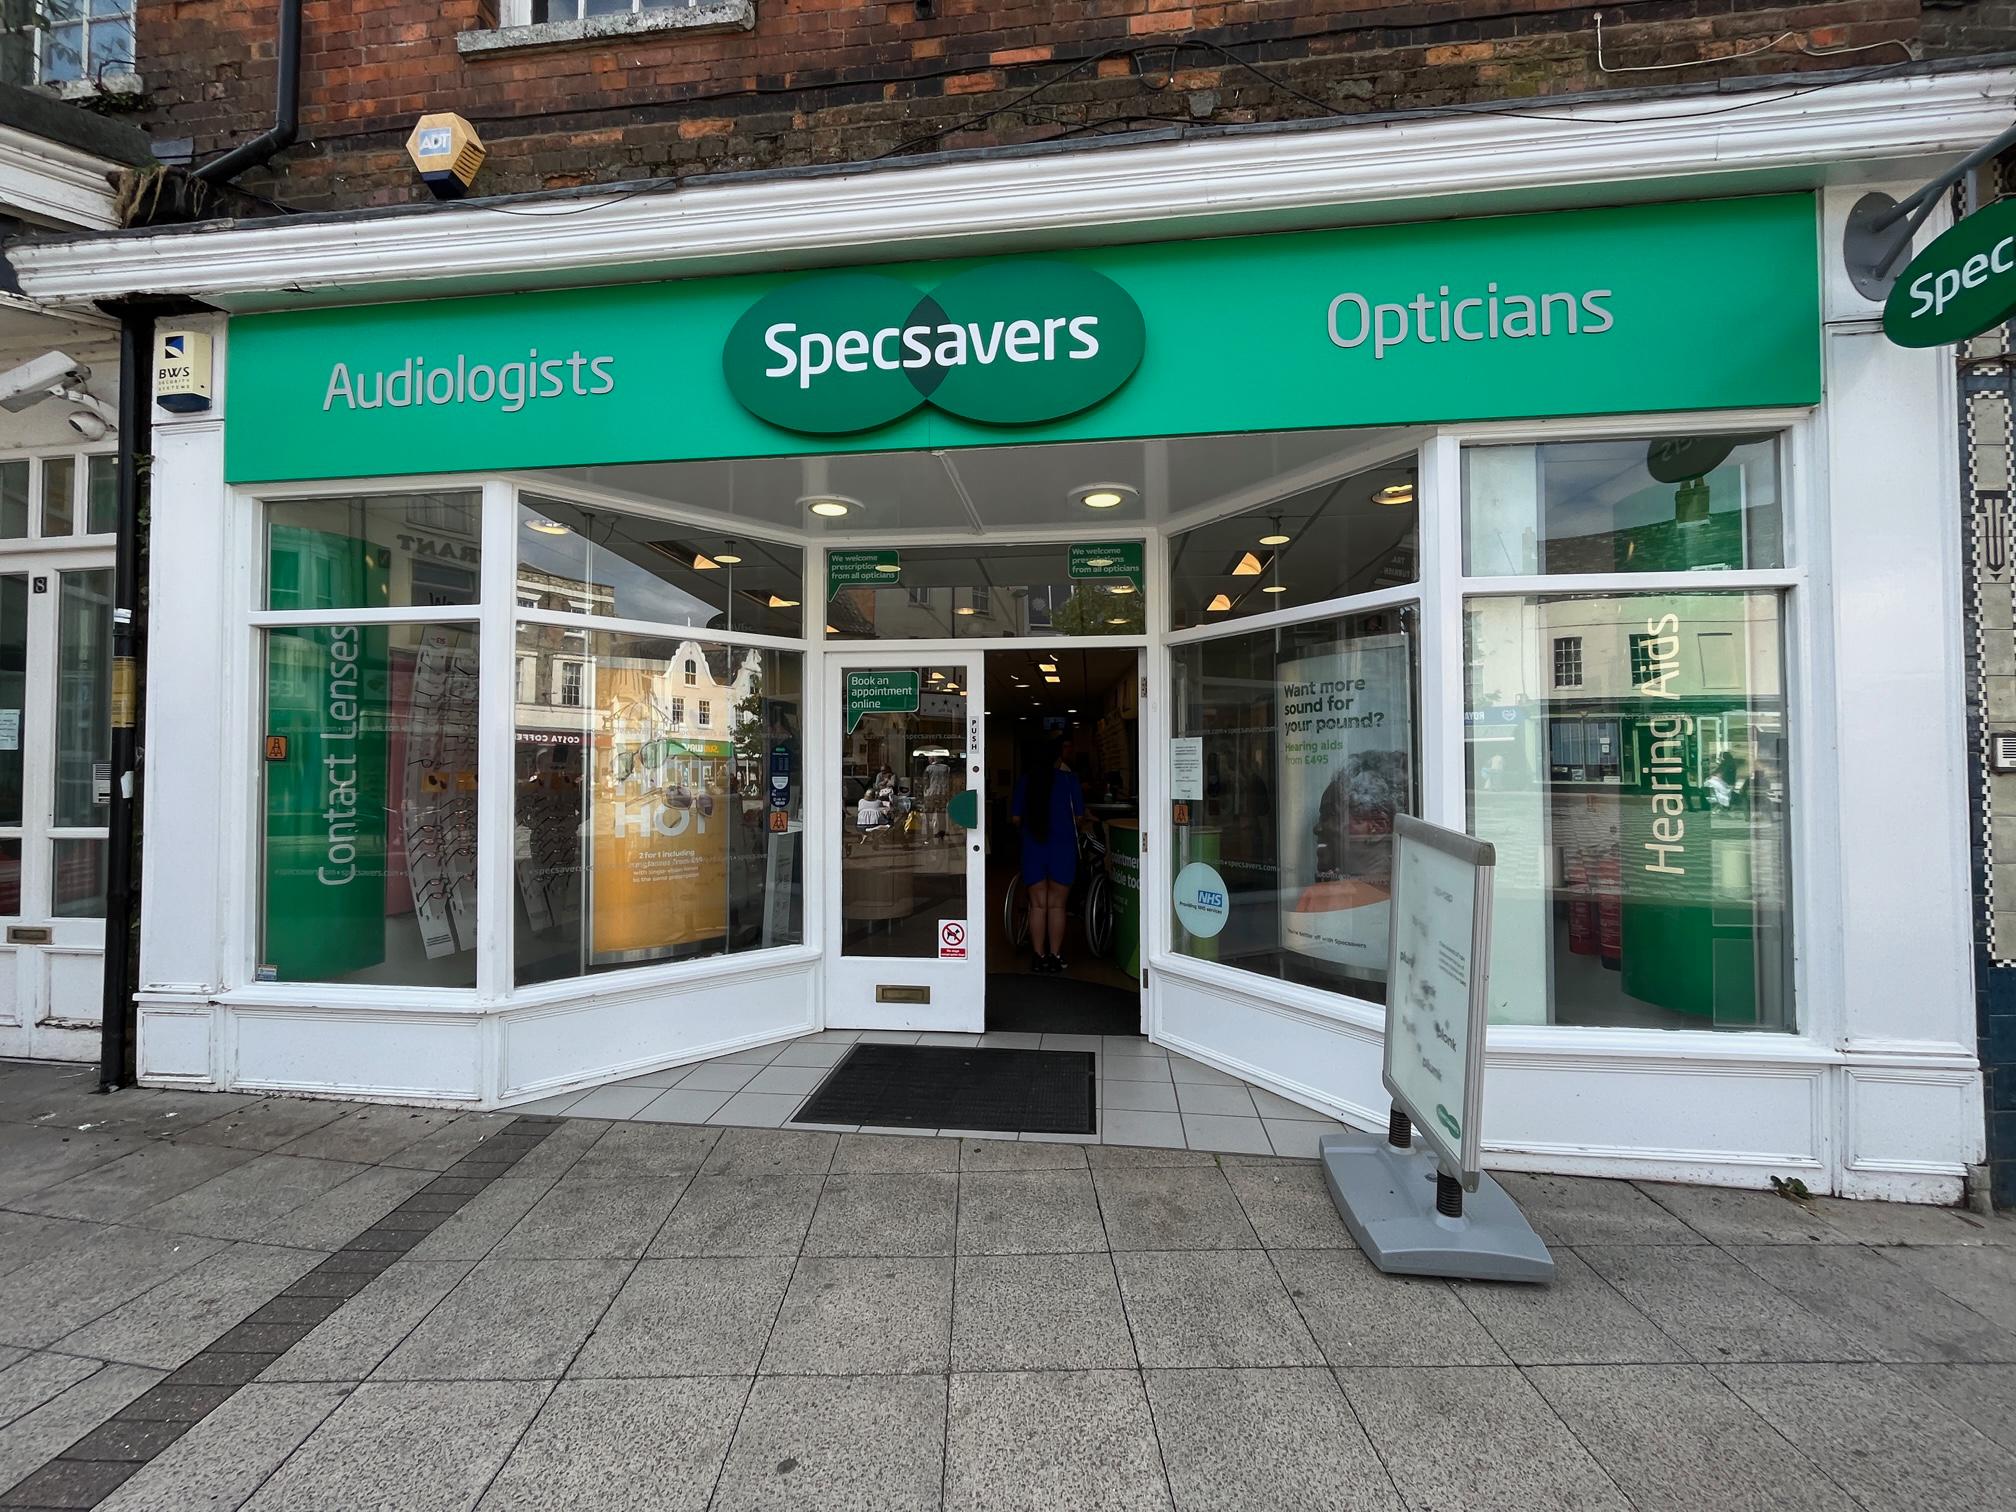 Images Specsavers Opticians and Audiologists - Wisbech